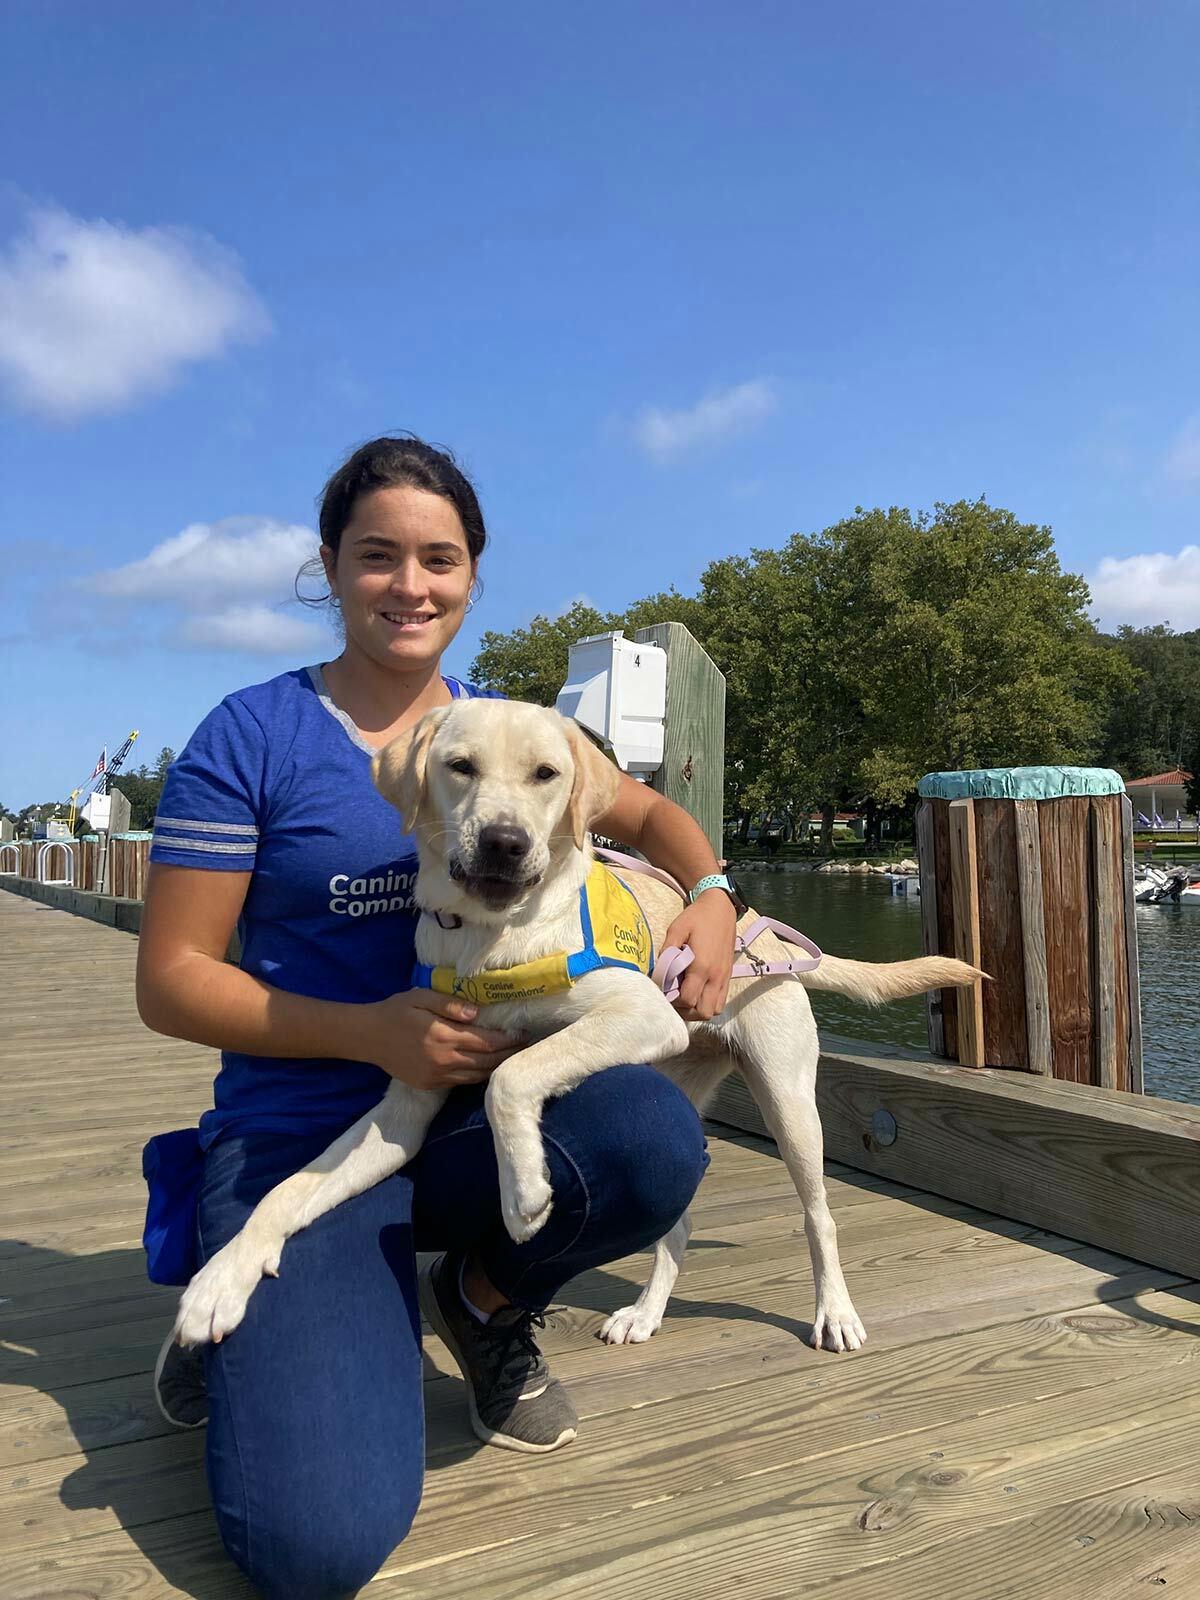 Brooke has created a special bond with Nutmeg VI, who recently turned nine months old. In May 2023, Nutmeg will move on to advanced training to learn commands that are useful to a person with disabilities.